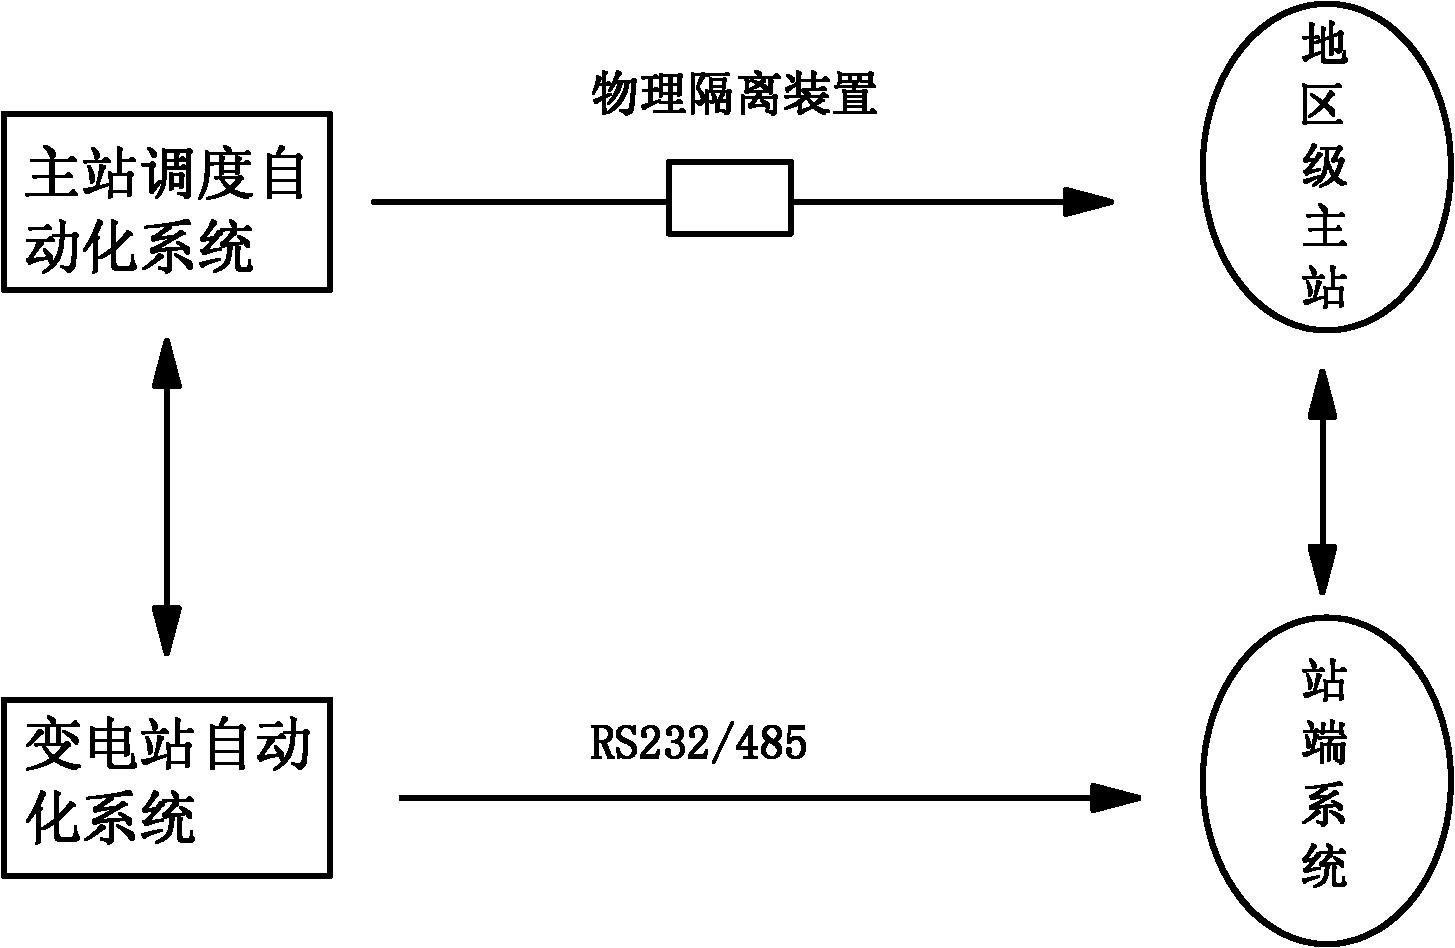 Method and system for realizing power network scheduling automation